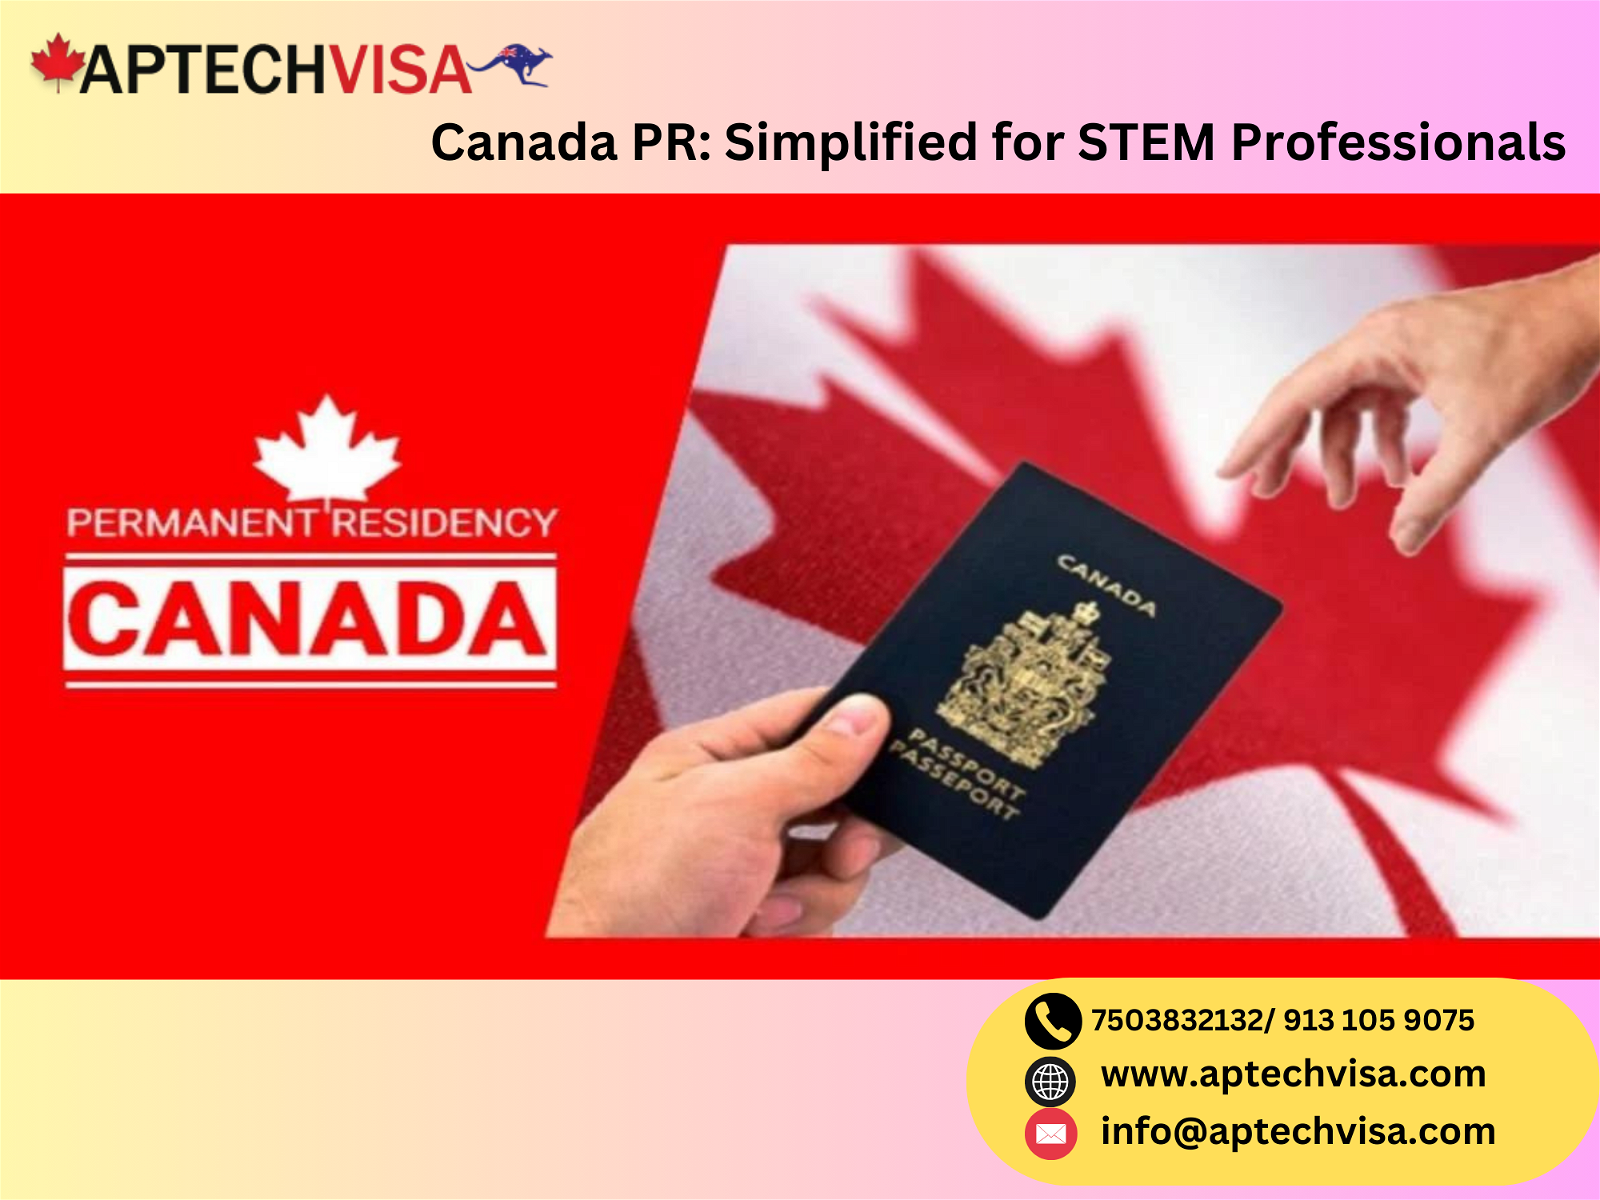 Canada PR: Simplified for STEM Professionals Image 